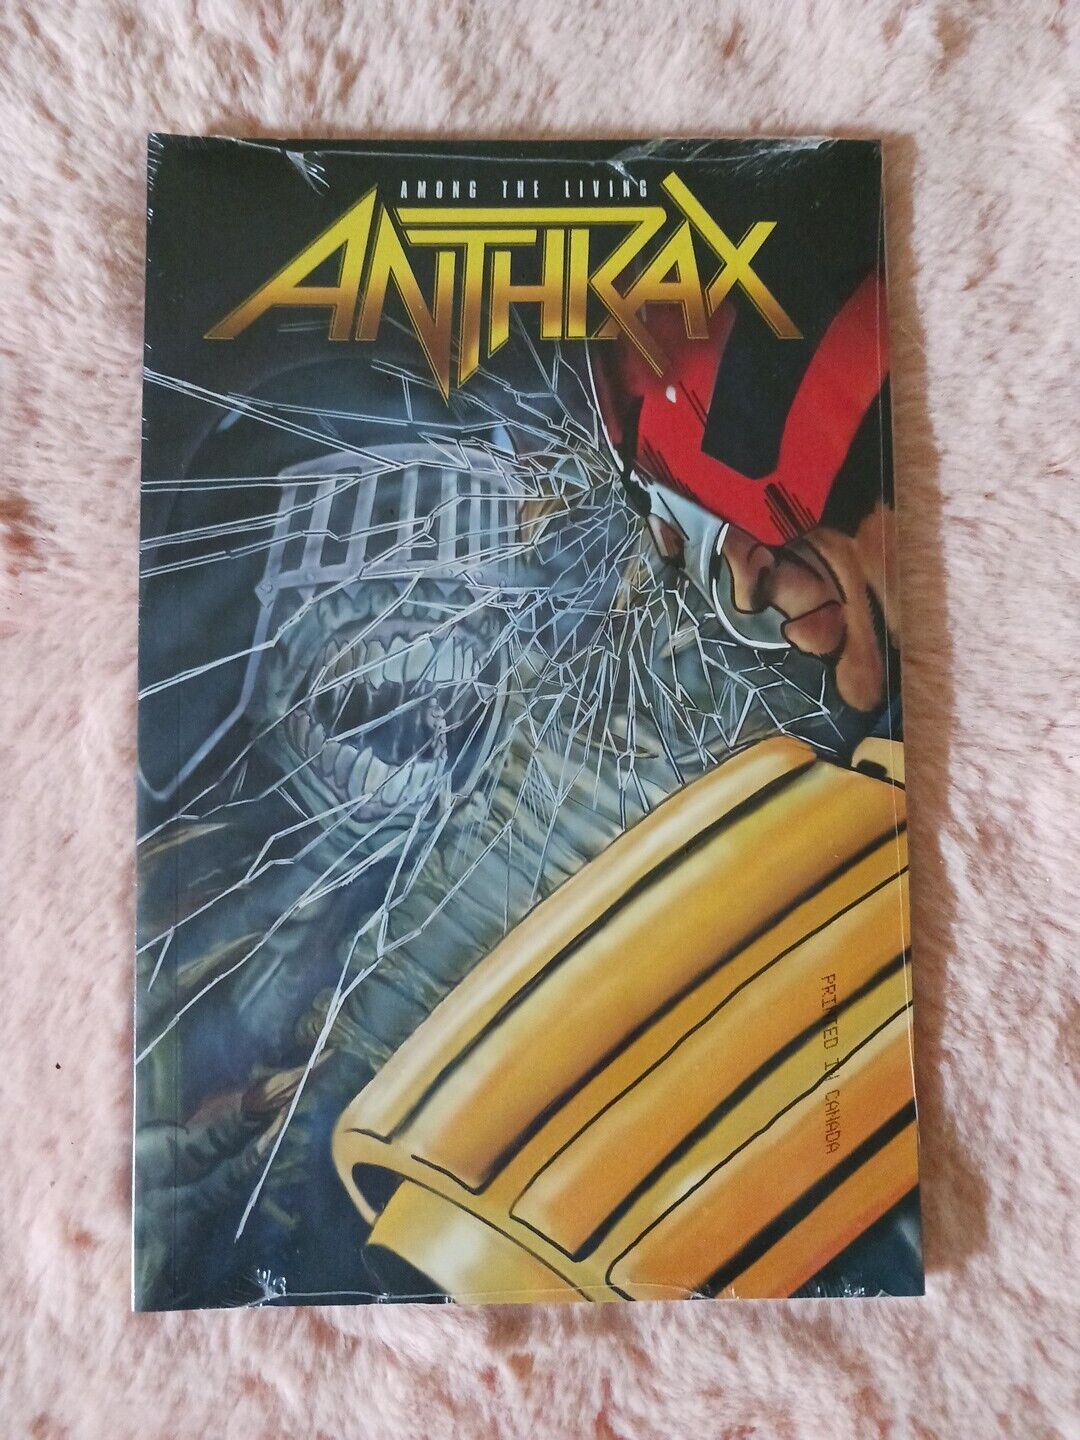 Anthrax Among The Living - Softcover  Z2 Comics DREDD VARIANT RARE Graphic Novel